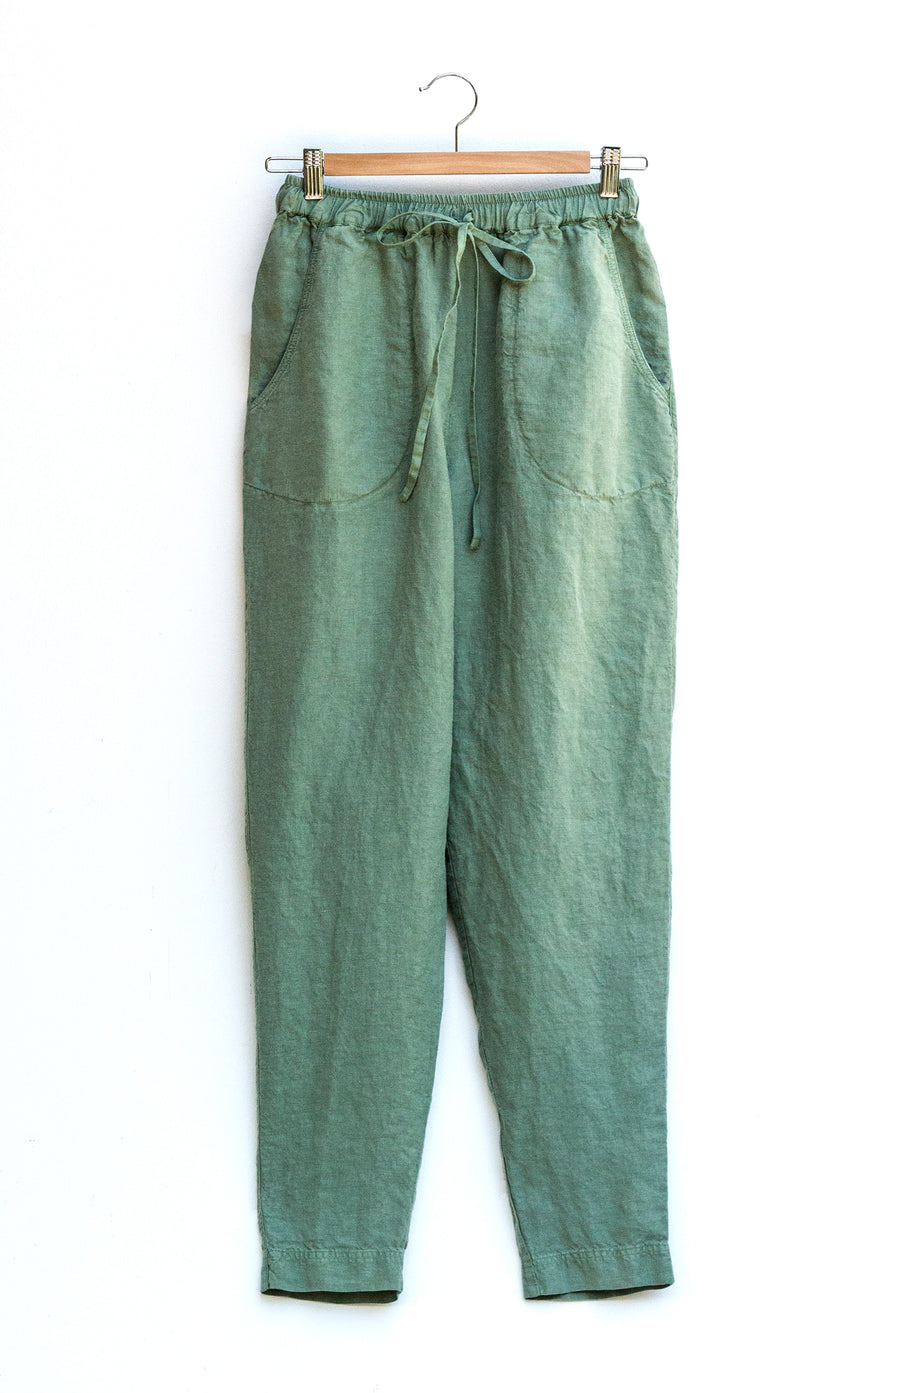 Comfortable airy trousers in Loden Frost shade